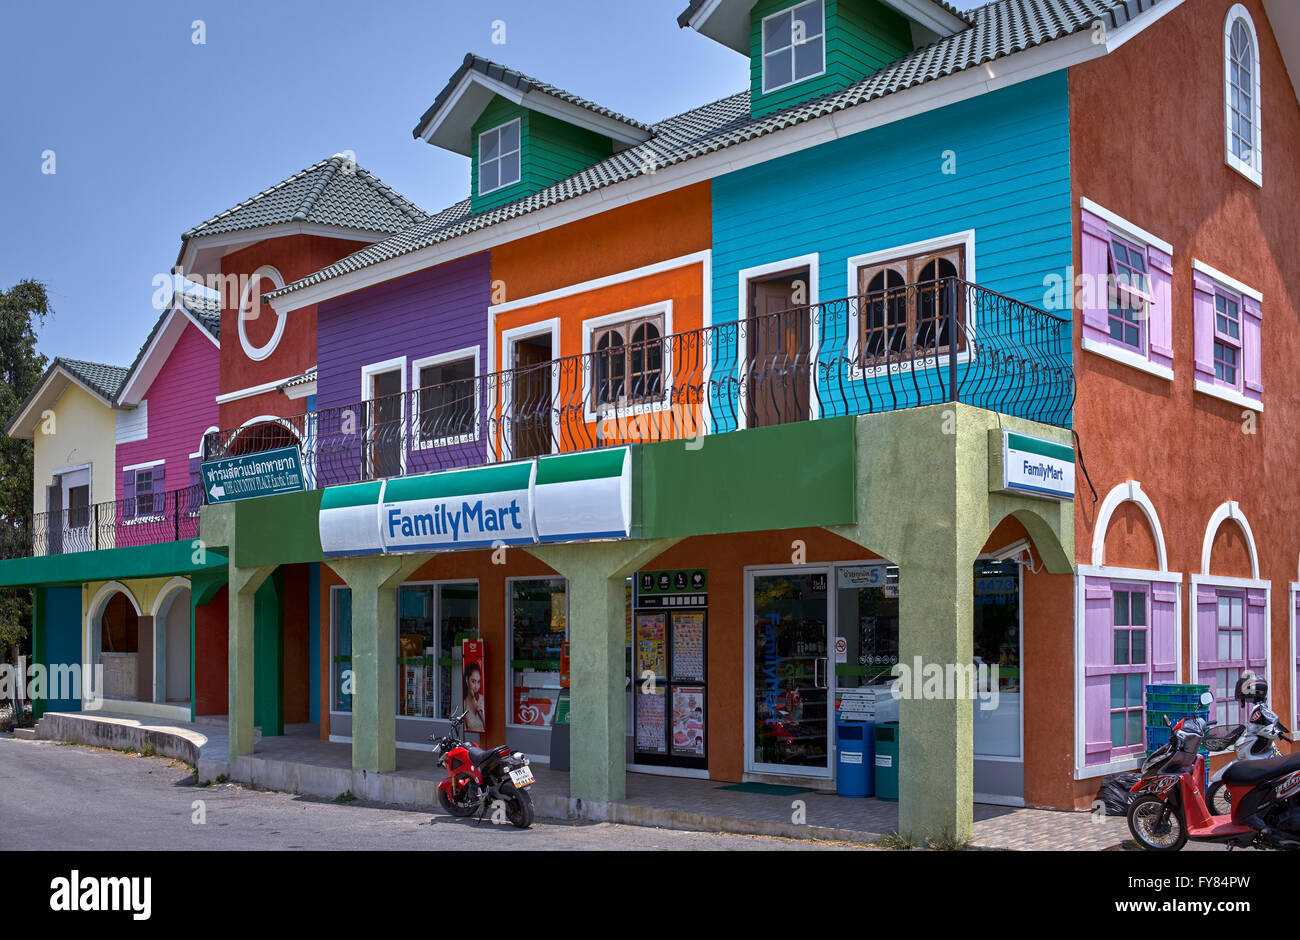 Family Mart, Thailand. Colourful building exterior of the Thai convenience store. Thailand S. E. Asia Stock Photo